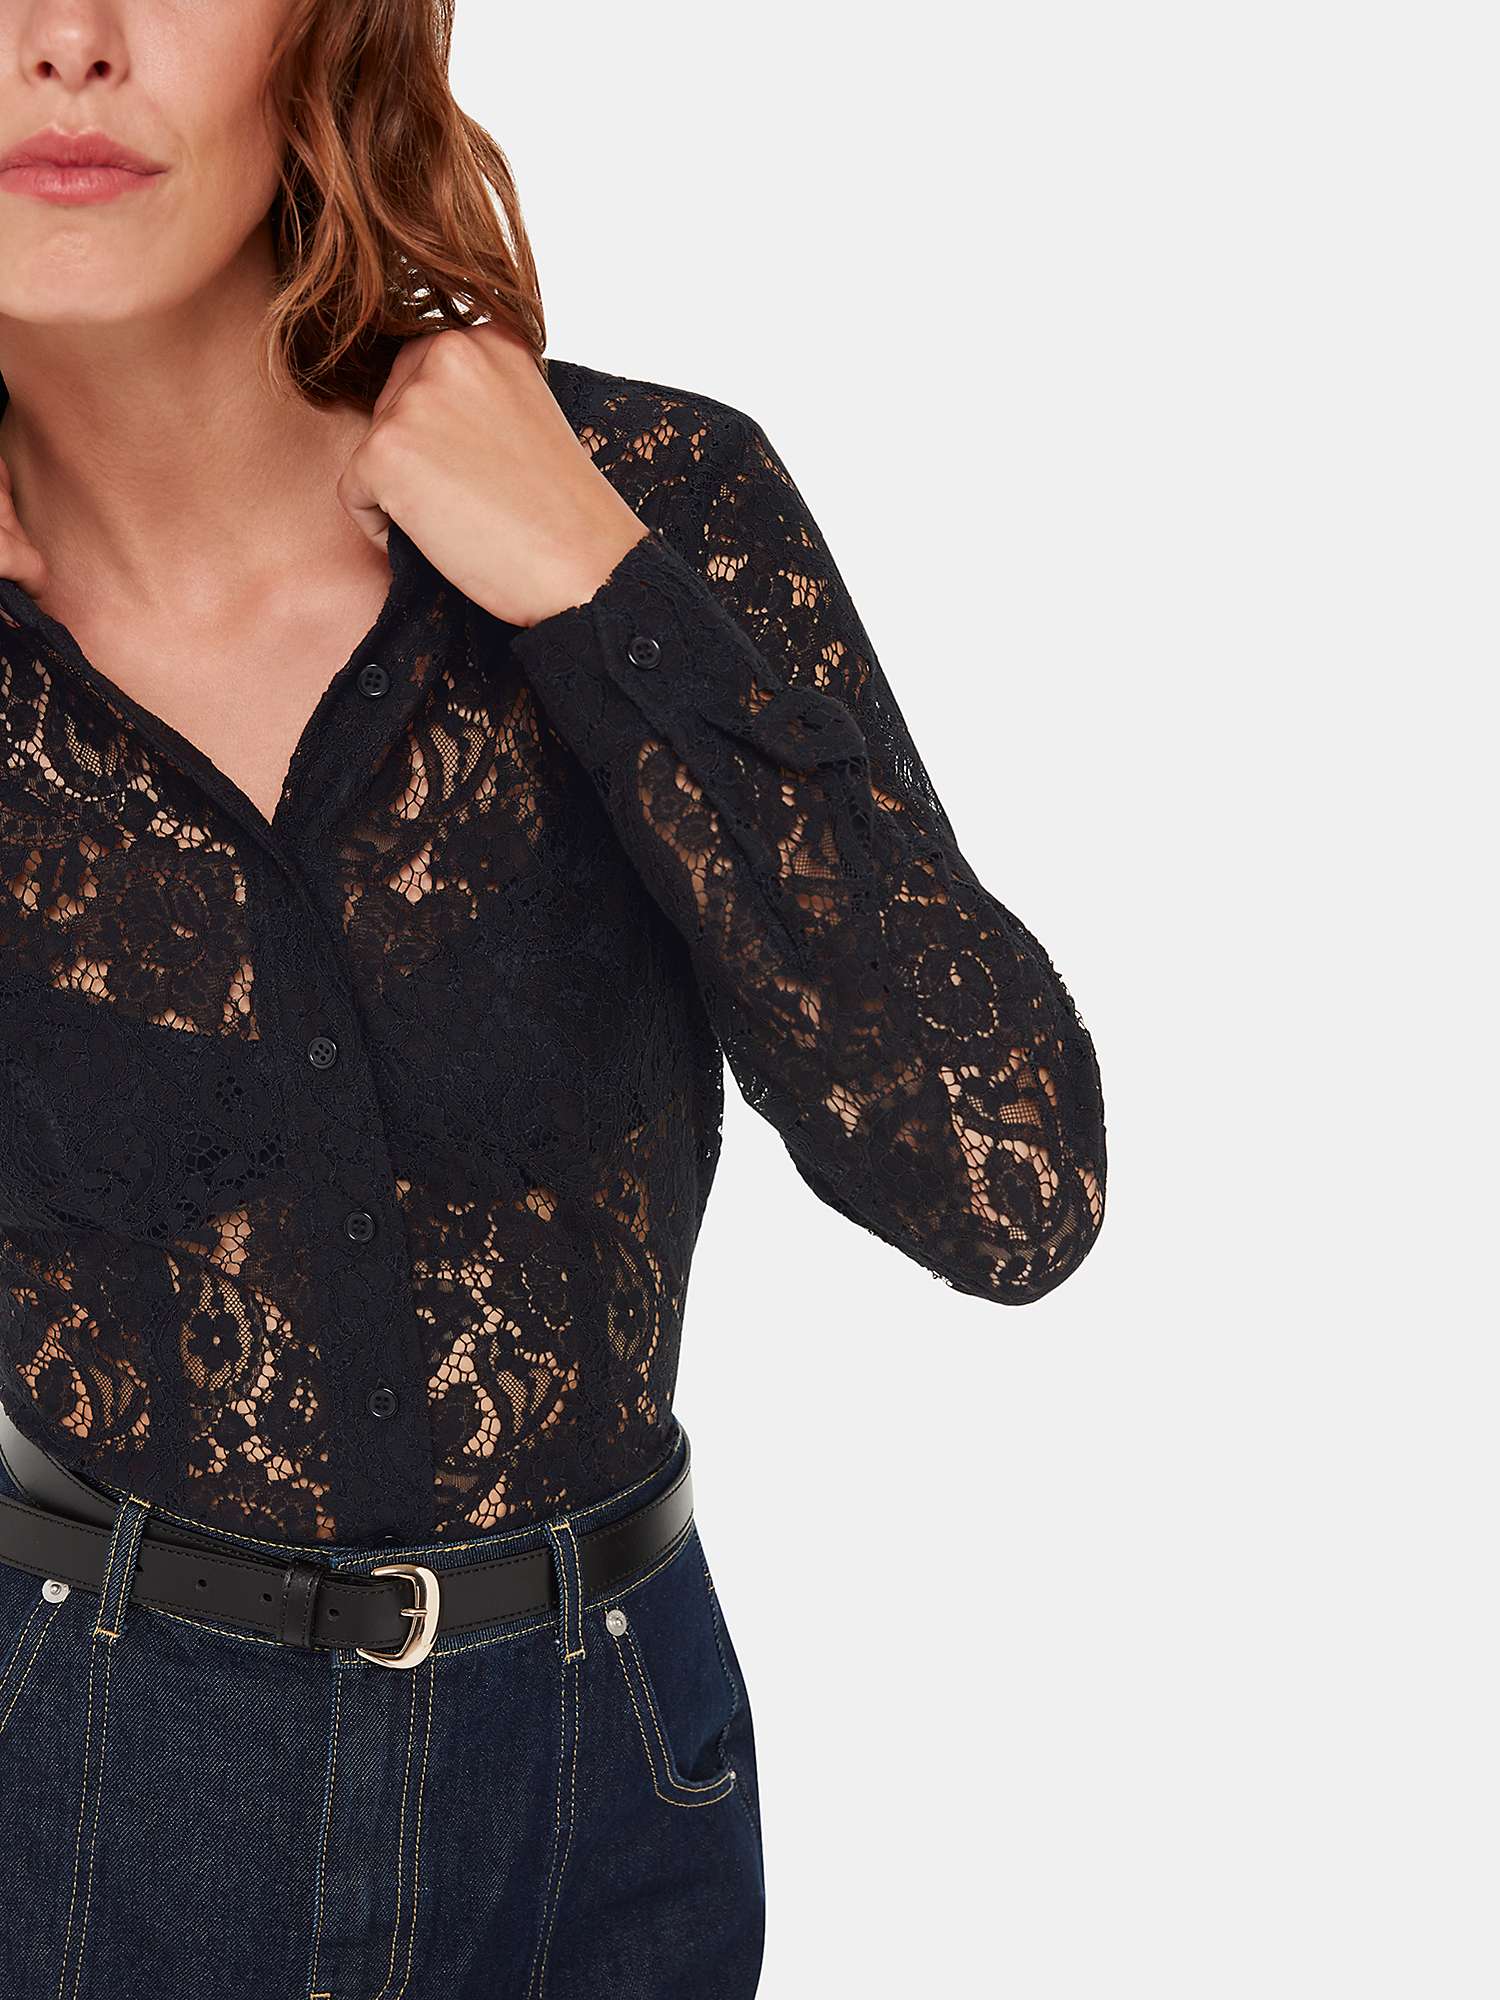 Buy Whistles Lucy Seam Detail Lace Blouse, Black Online at johnlewis.com